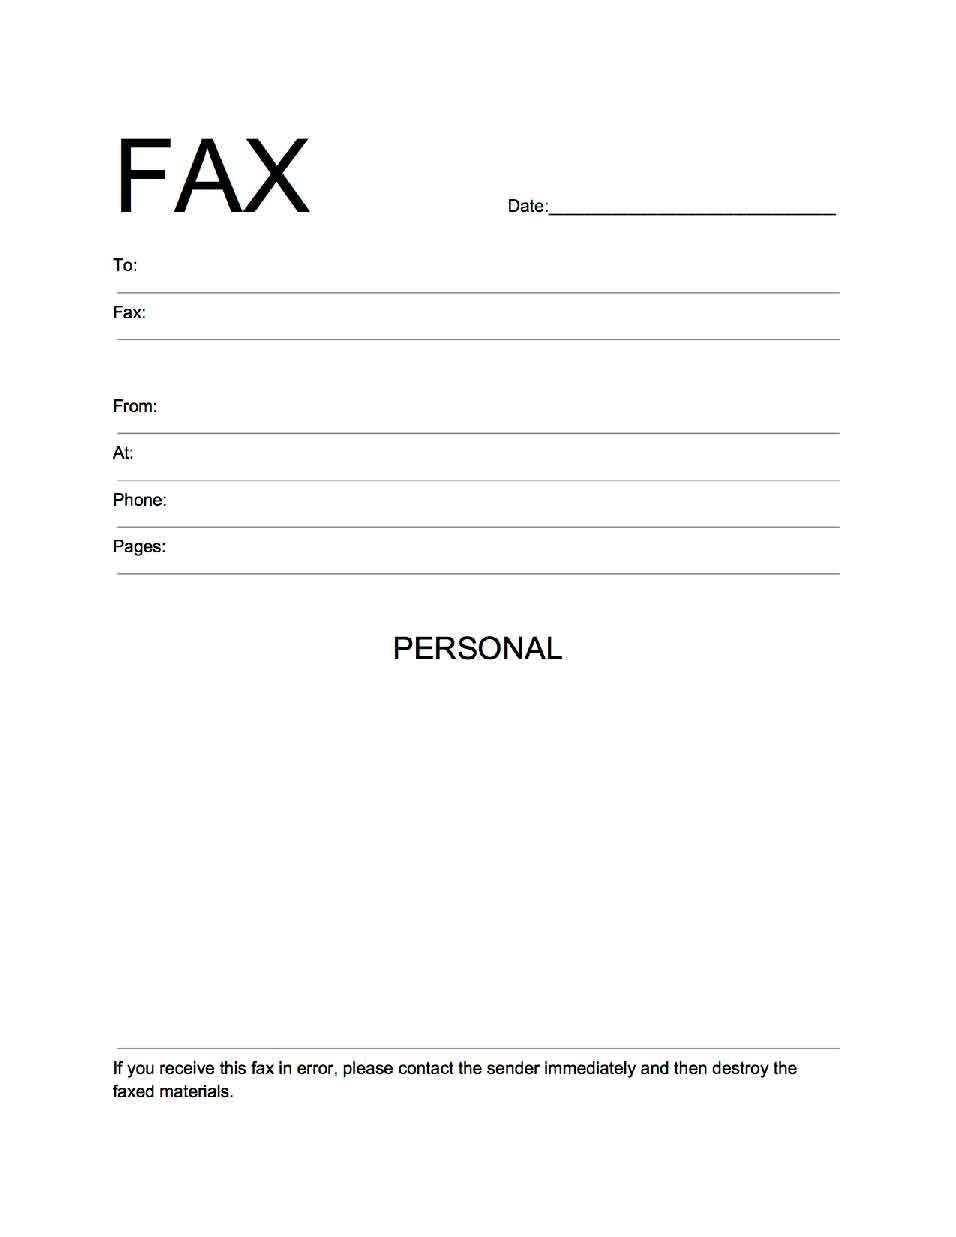 Free Printable Fax Cover Sheet No Download | Shop Fresh - Free Printable Fax Cover Page